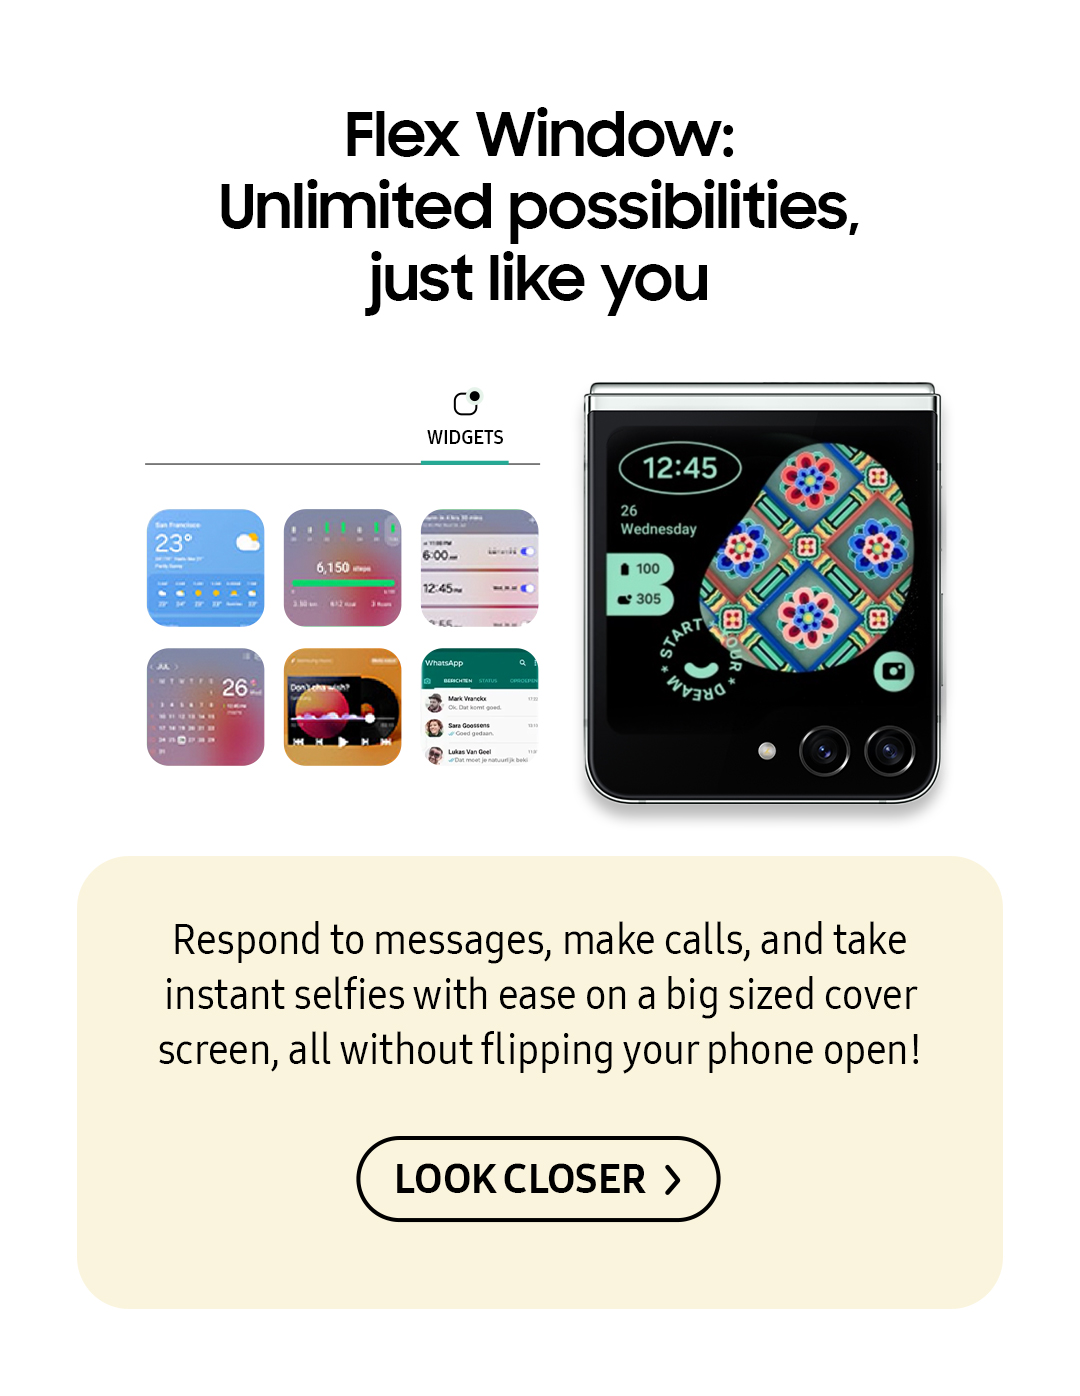 Flex Window: Unlimited possibilities, just like you | Respond to messages, make calls, and take instant selfies with ease on a big sized cover screen, all without flipping your phone open! Click here to see it!